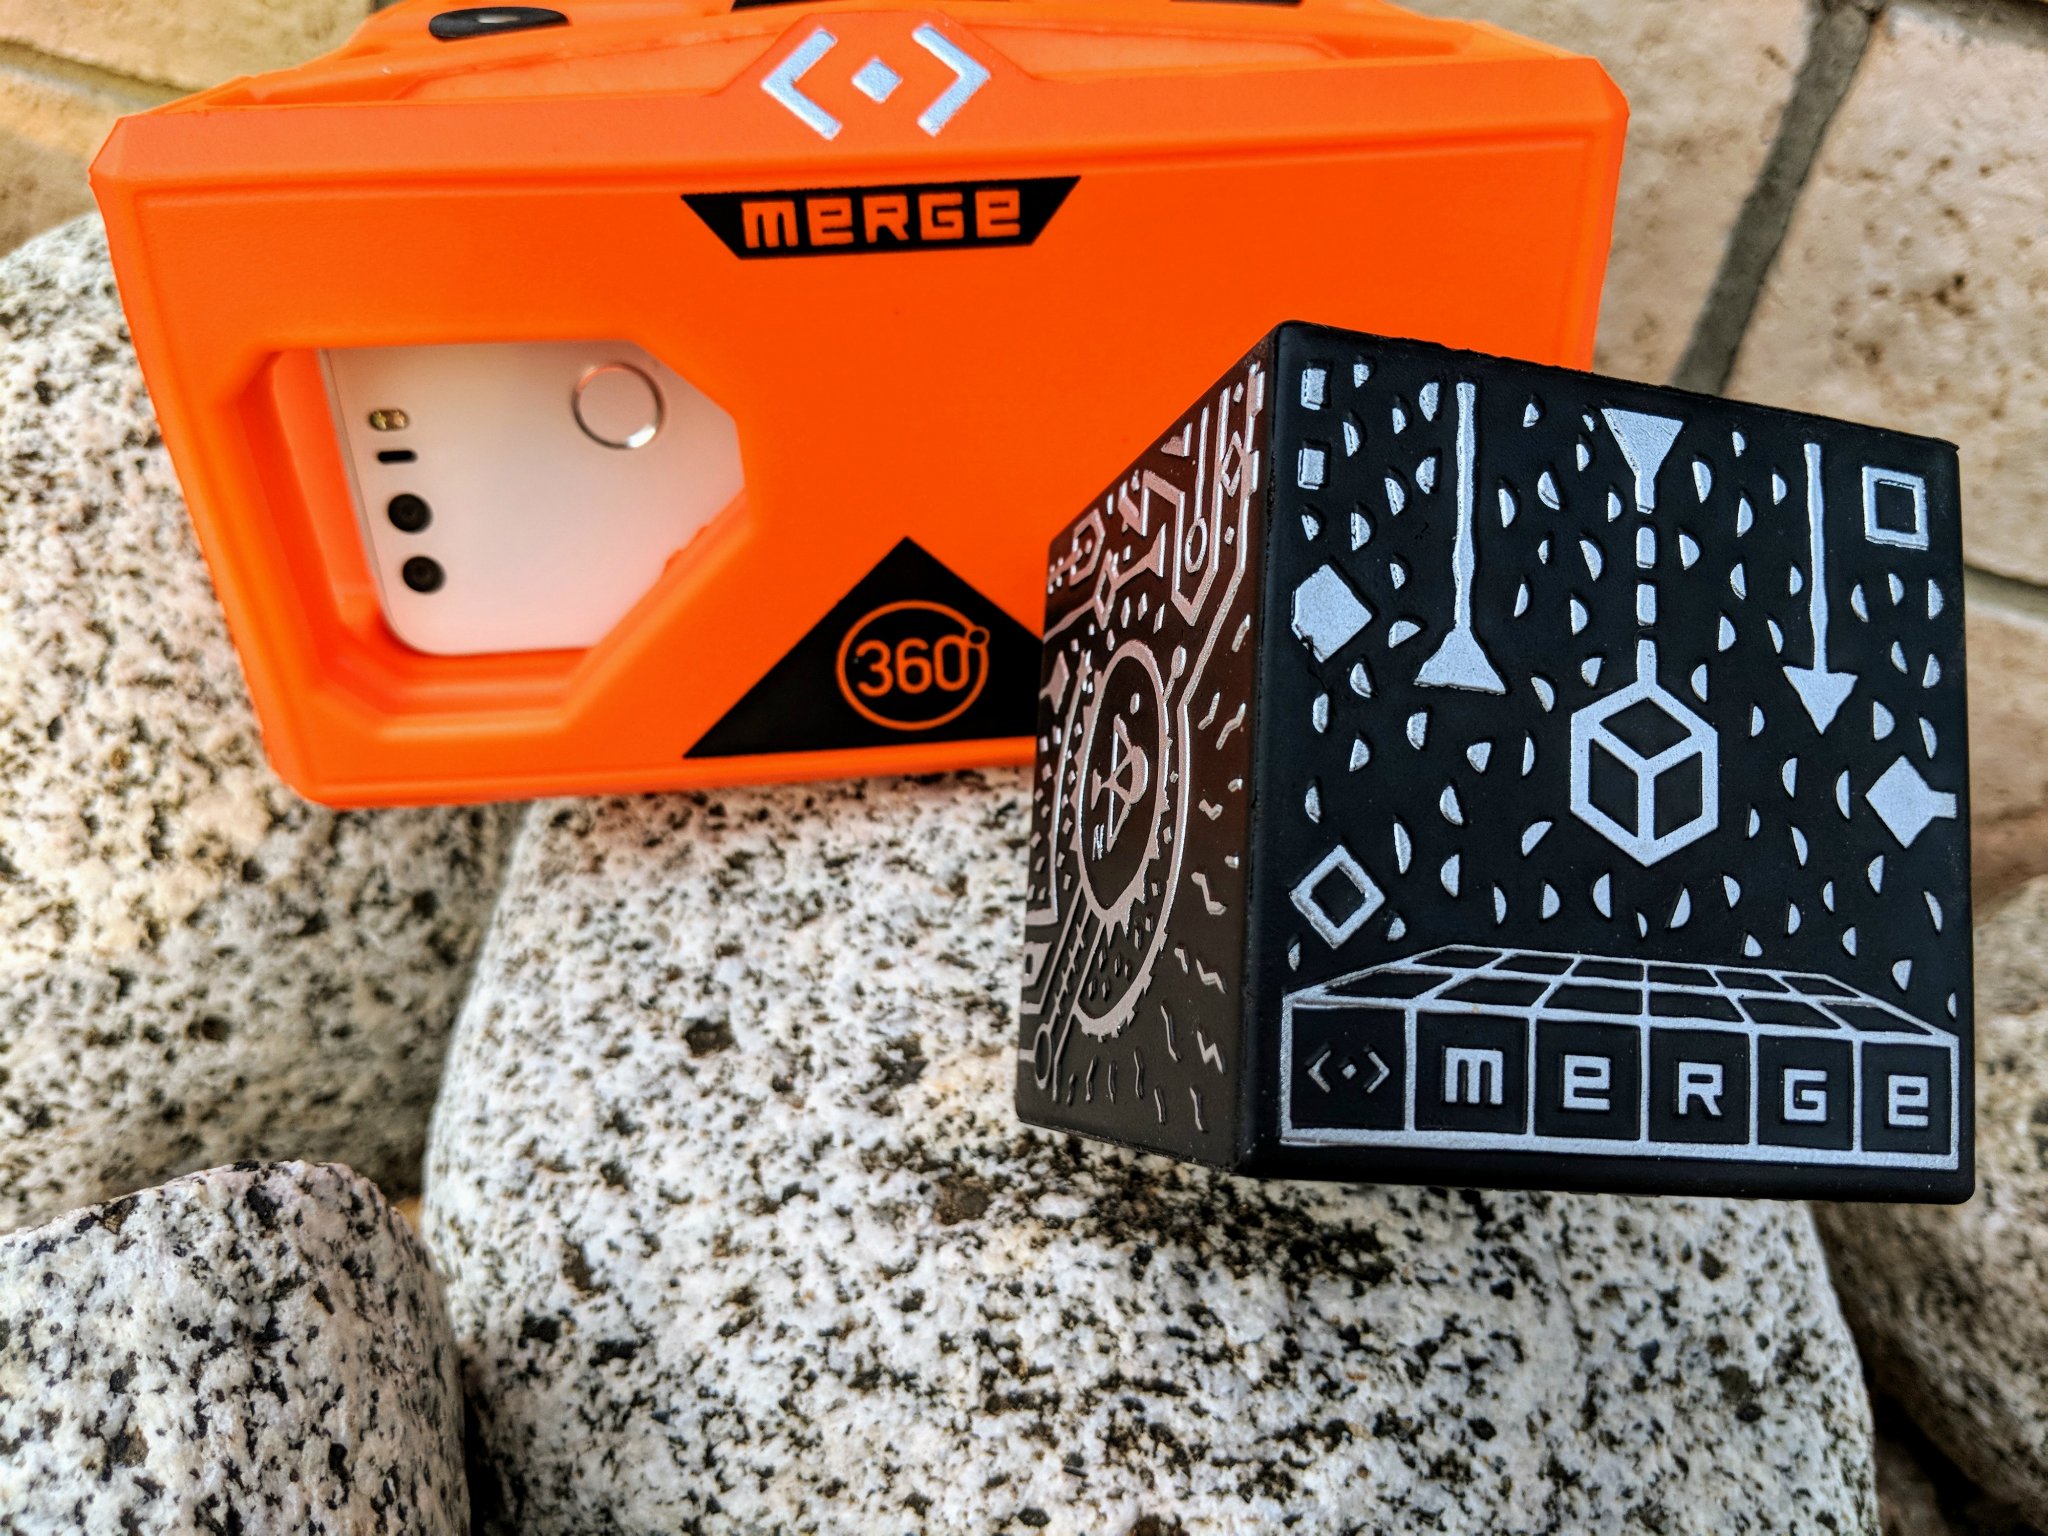 These Merge Cube games work best with a VR headset